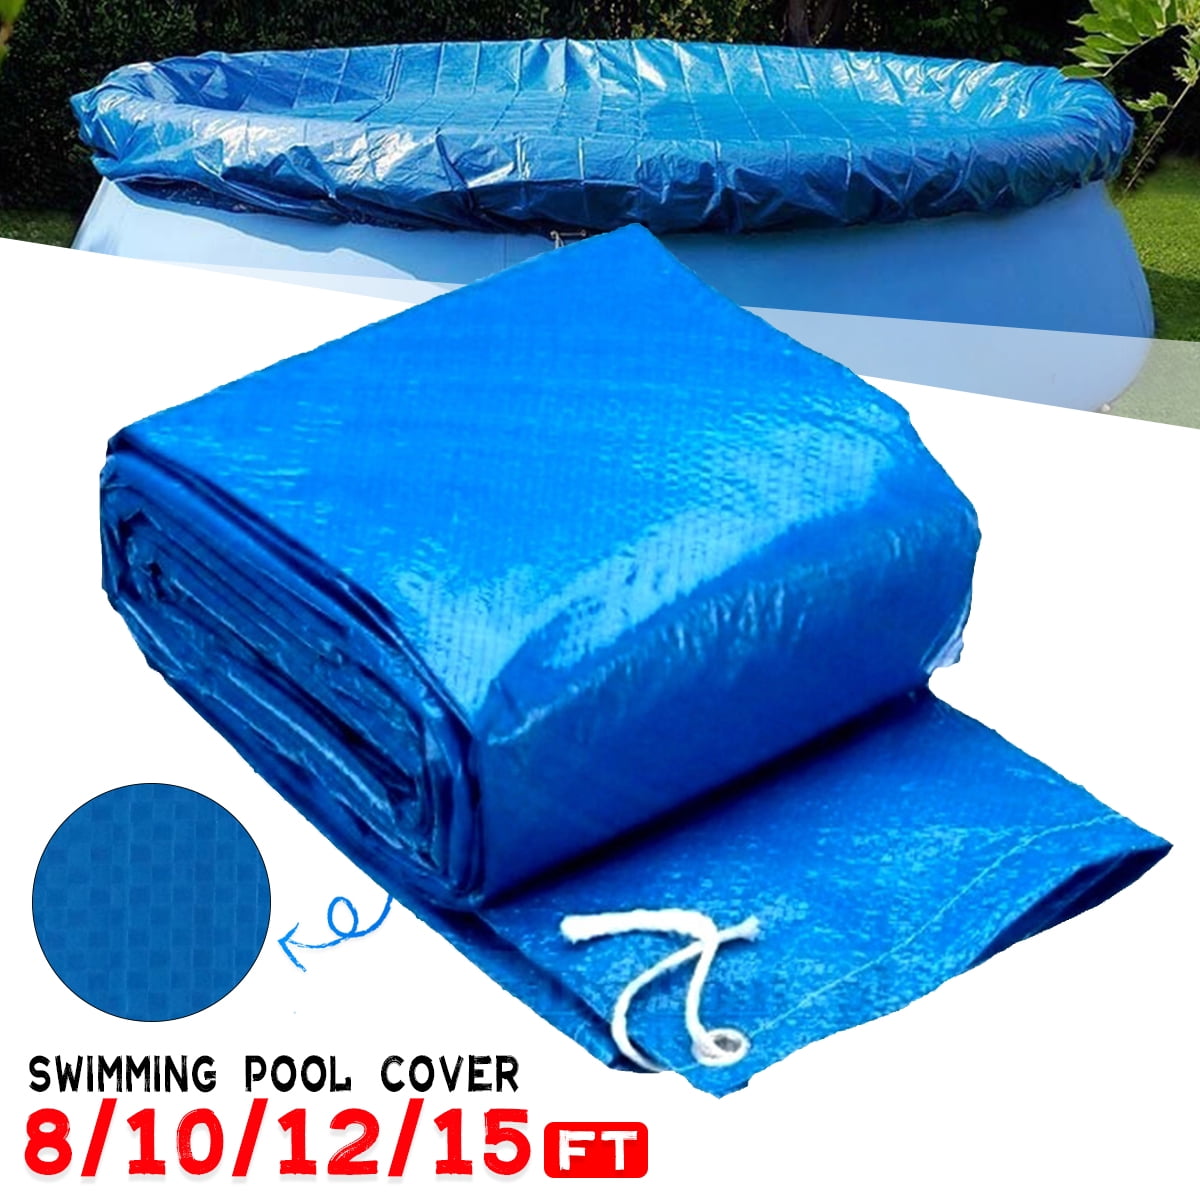 Reduce Water Evaporation Keep Water Warm Dustproof Easy Set Pool Protector Ground Inflatable Swimming Pools Round Pool Cover,8/10/12/15 Ft Swimming Waterproof Round Cover with Rope Ties 